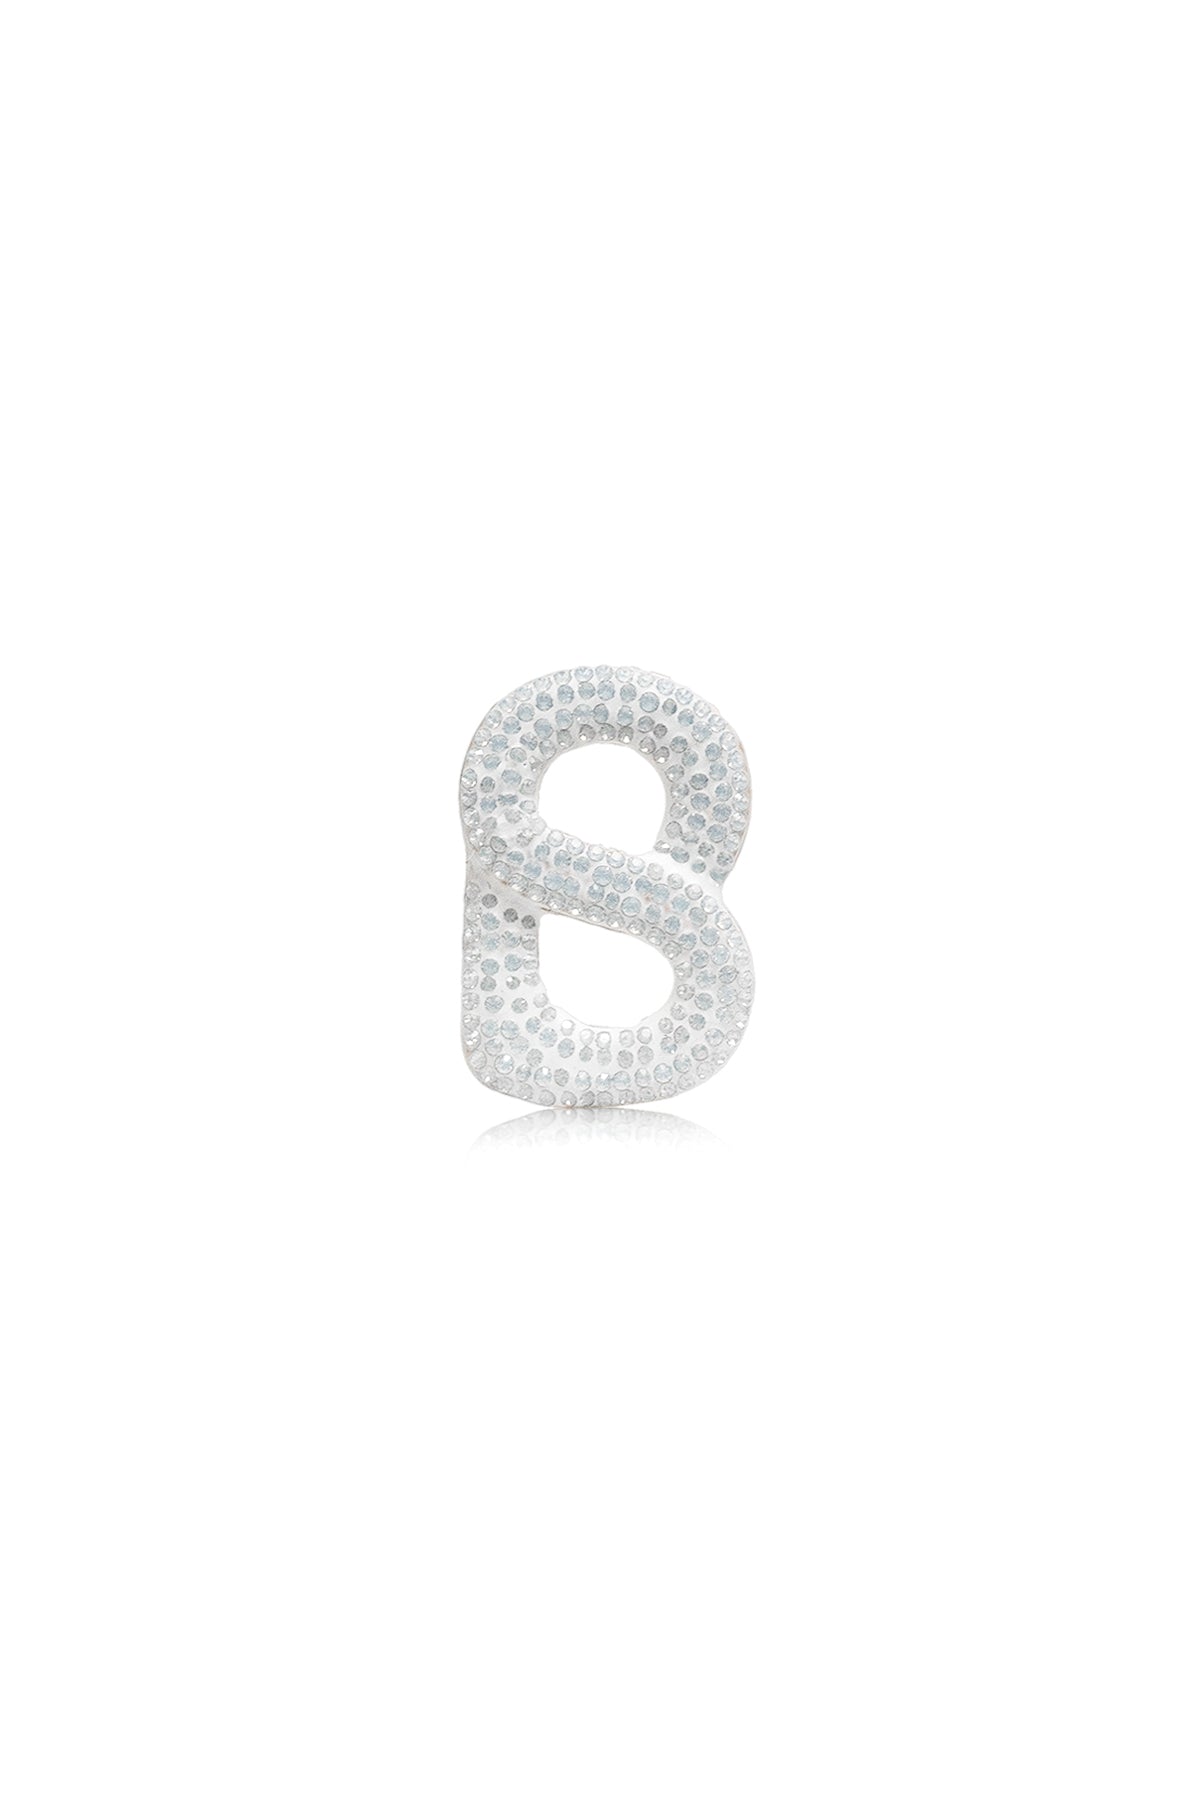 LUXE SIGNATURE BROOCH - WHITE